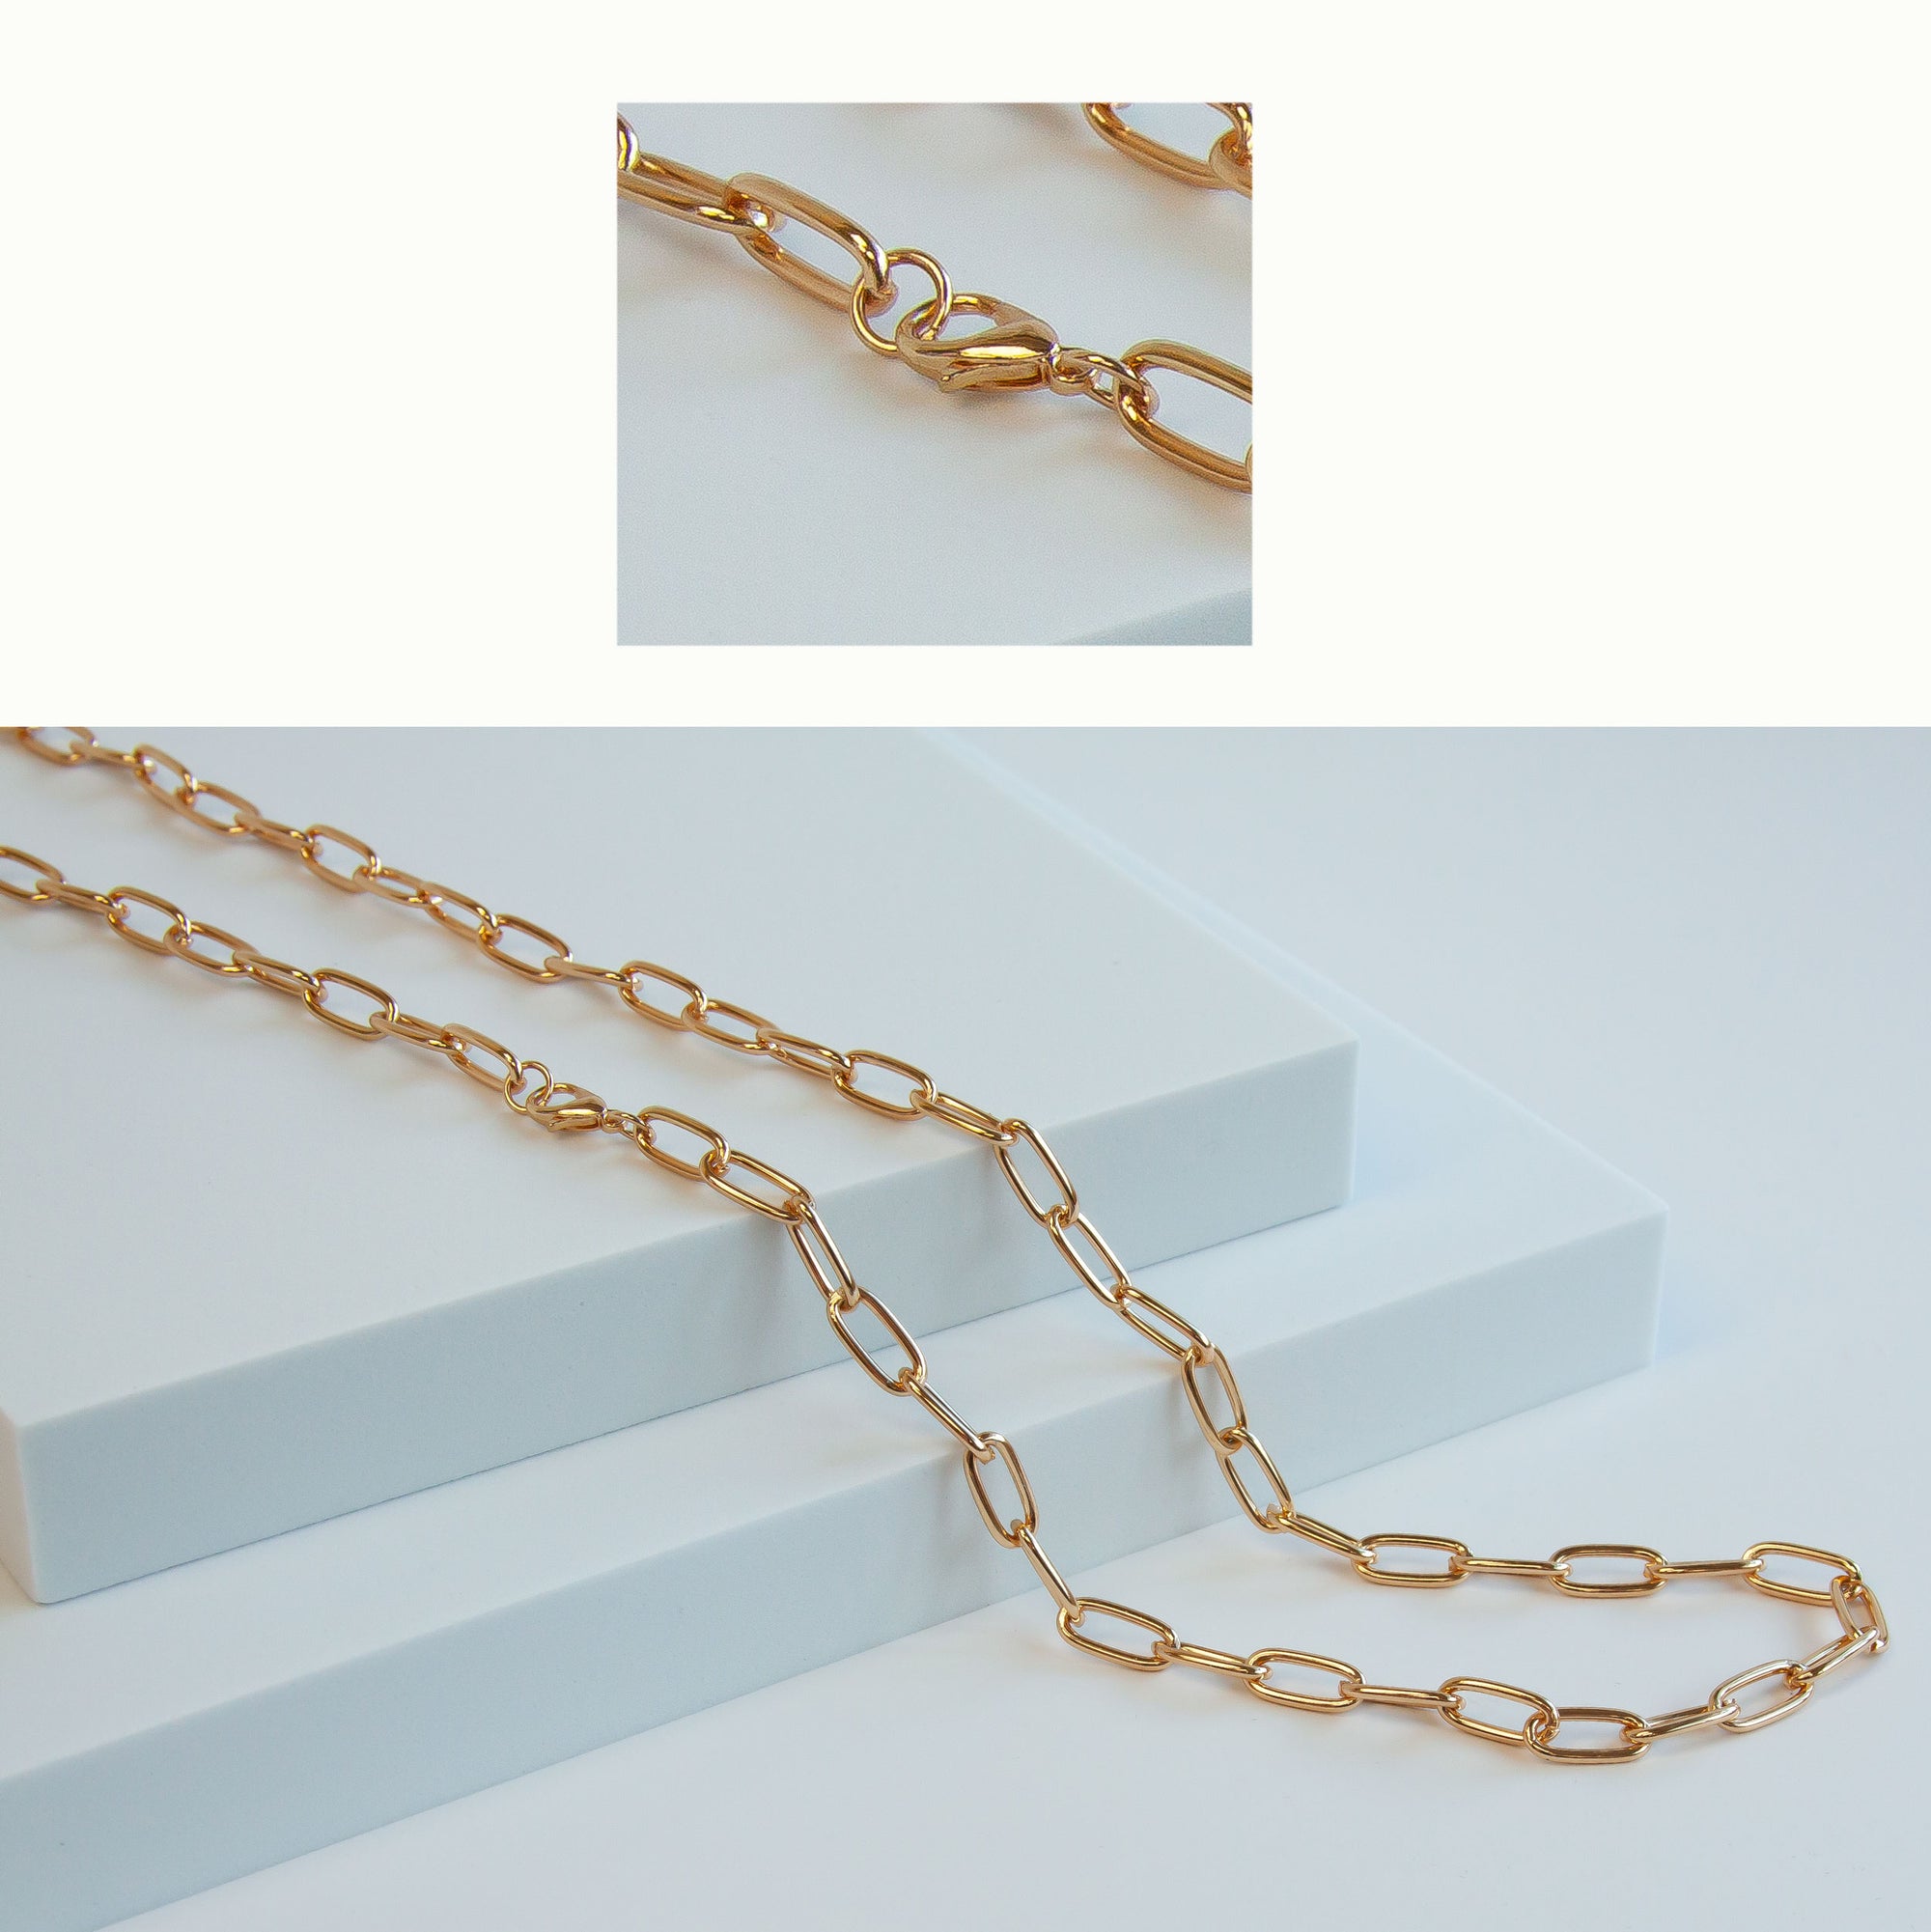 Charles Albert Jewelry - Gold Tone Base Metal Paperclip Chain with Lobster Claw Clasp